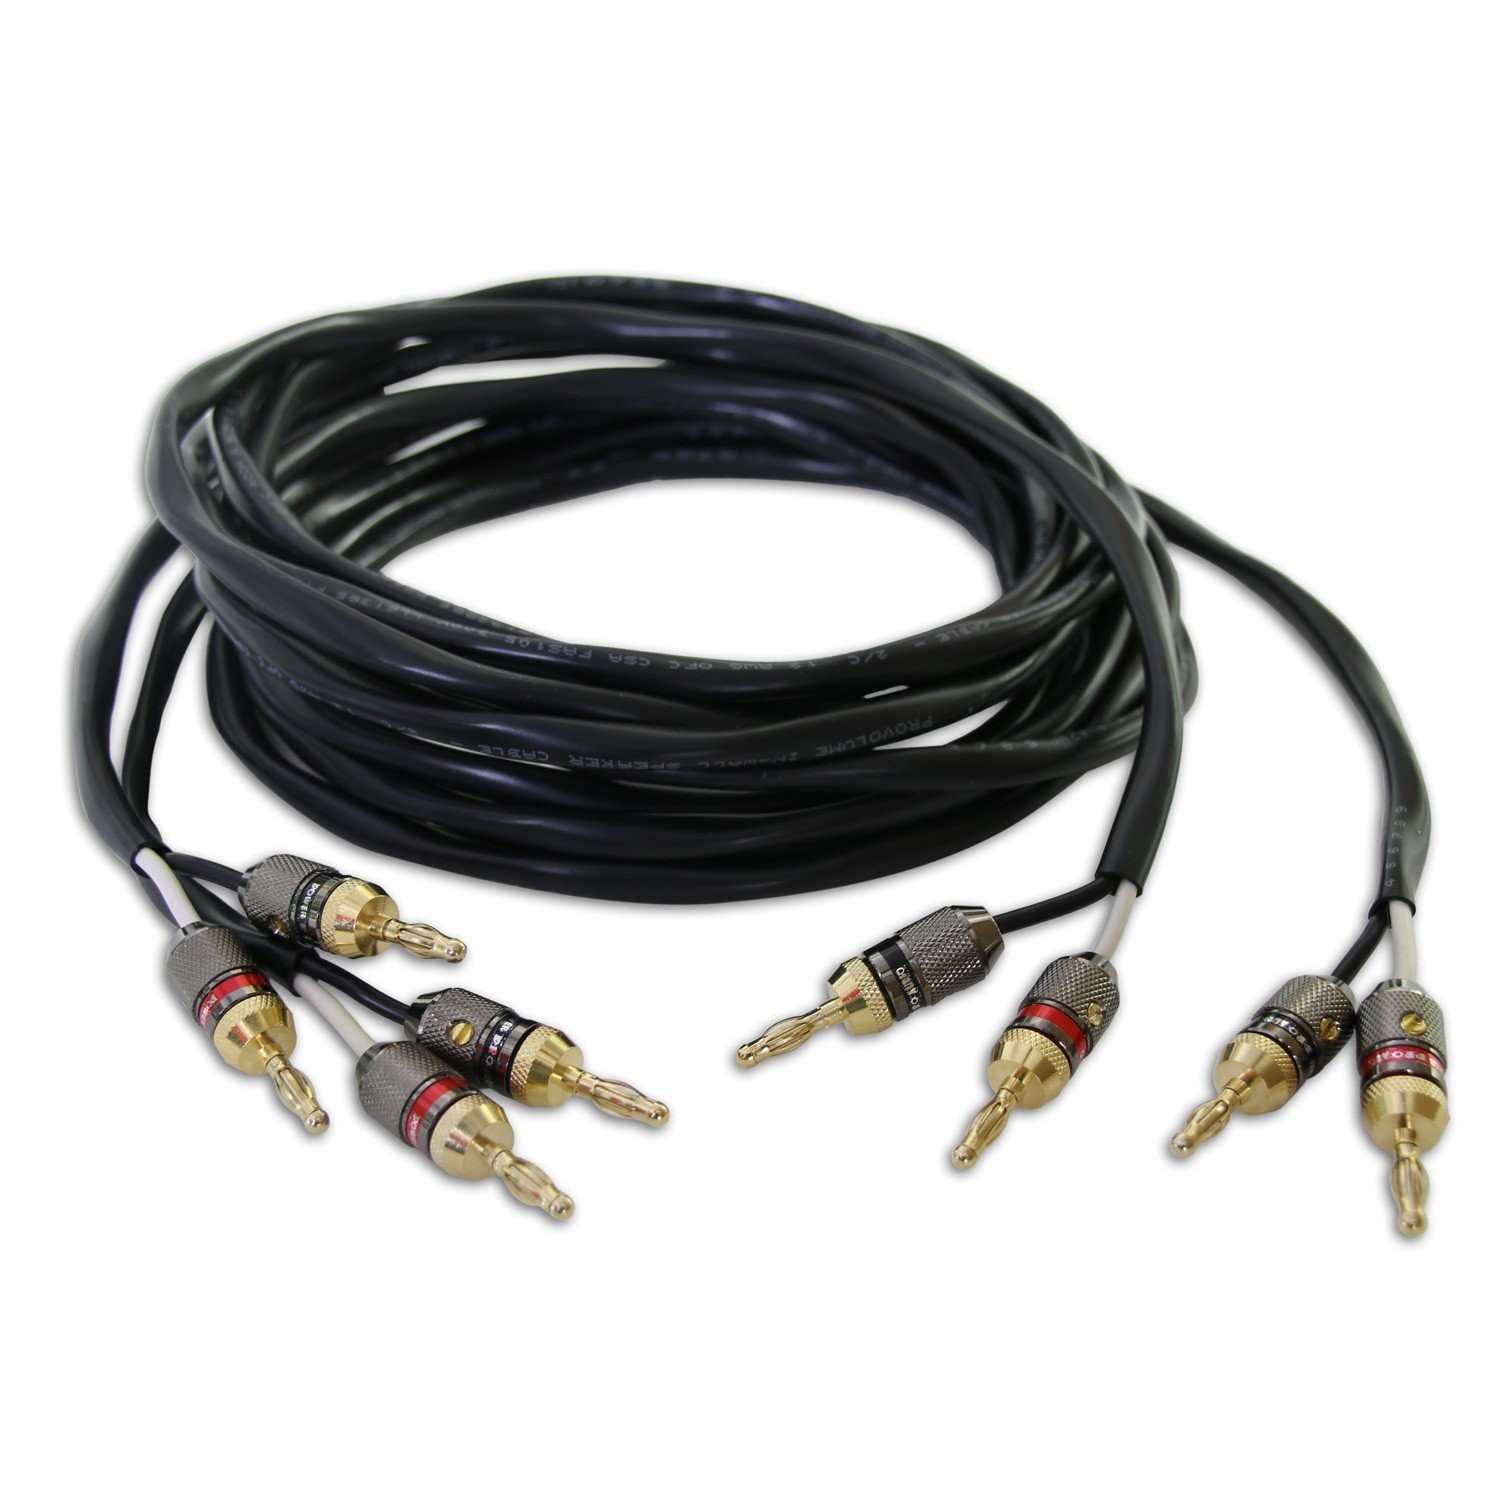 ThruSound HiFi-Series 12AWG 2-Conductor Speaker Wire with Premium 24k Gold-Plated Banana Plugs (20 Feet/Pair)